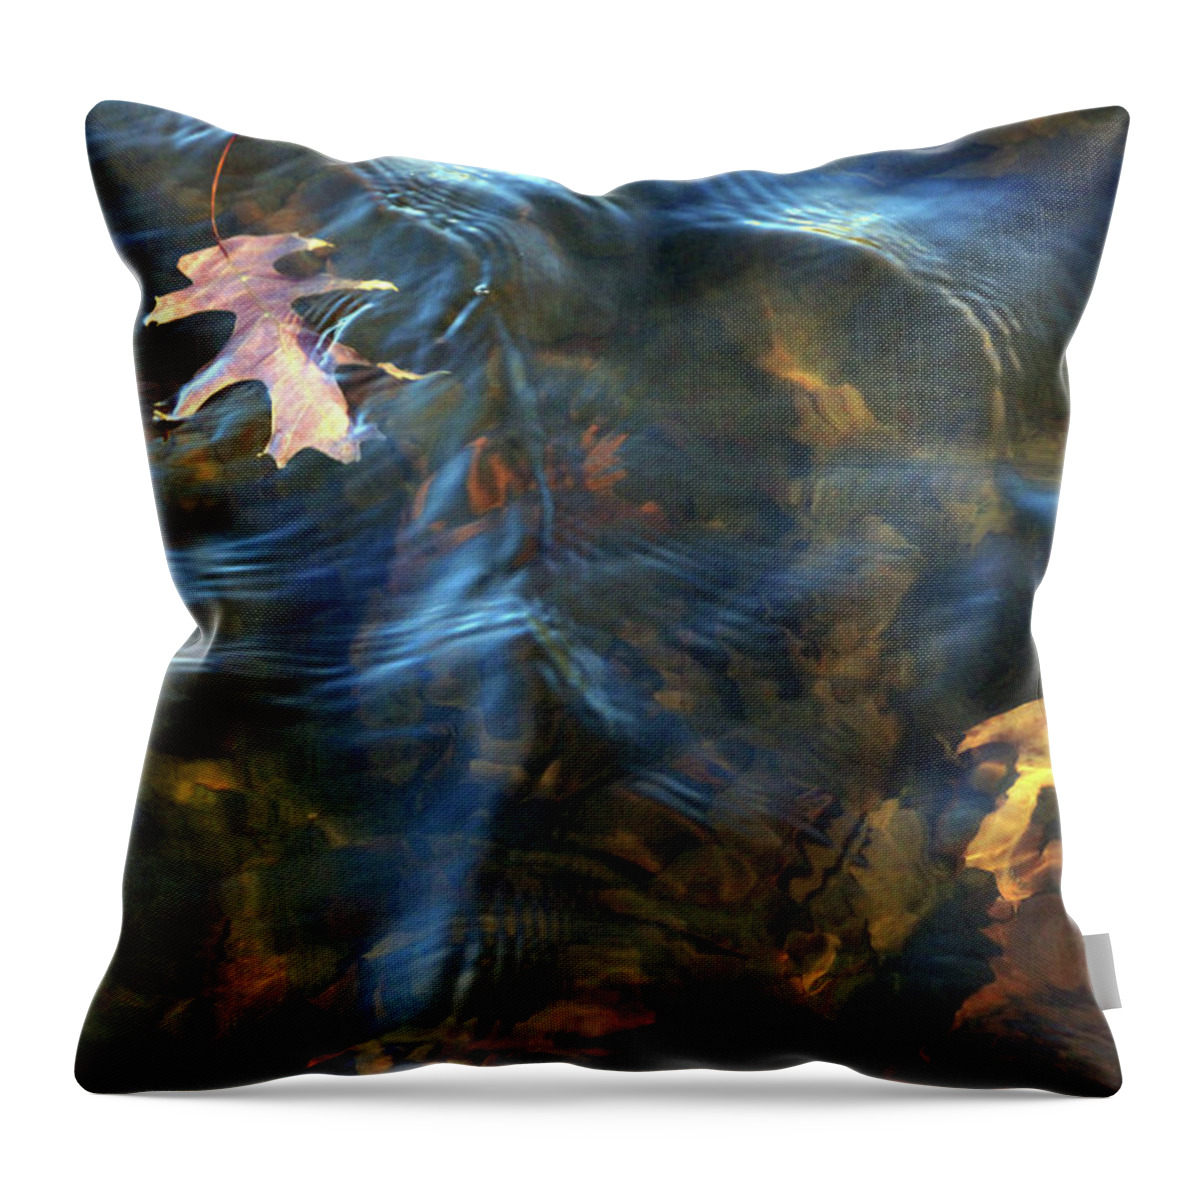 Leaves Throw Pillow featuring the photograph Autumn Leaves In Shallow Water With Ripples by Cora Wandel